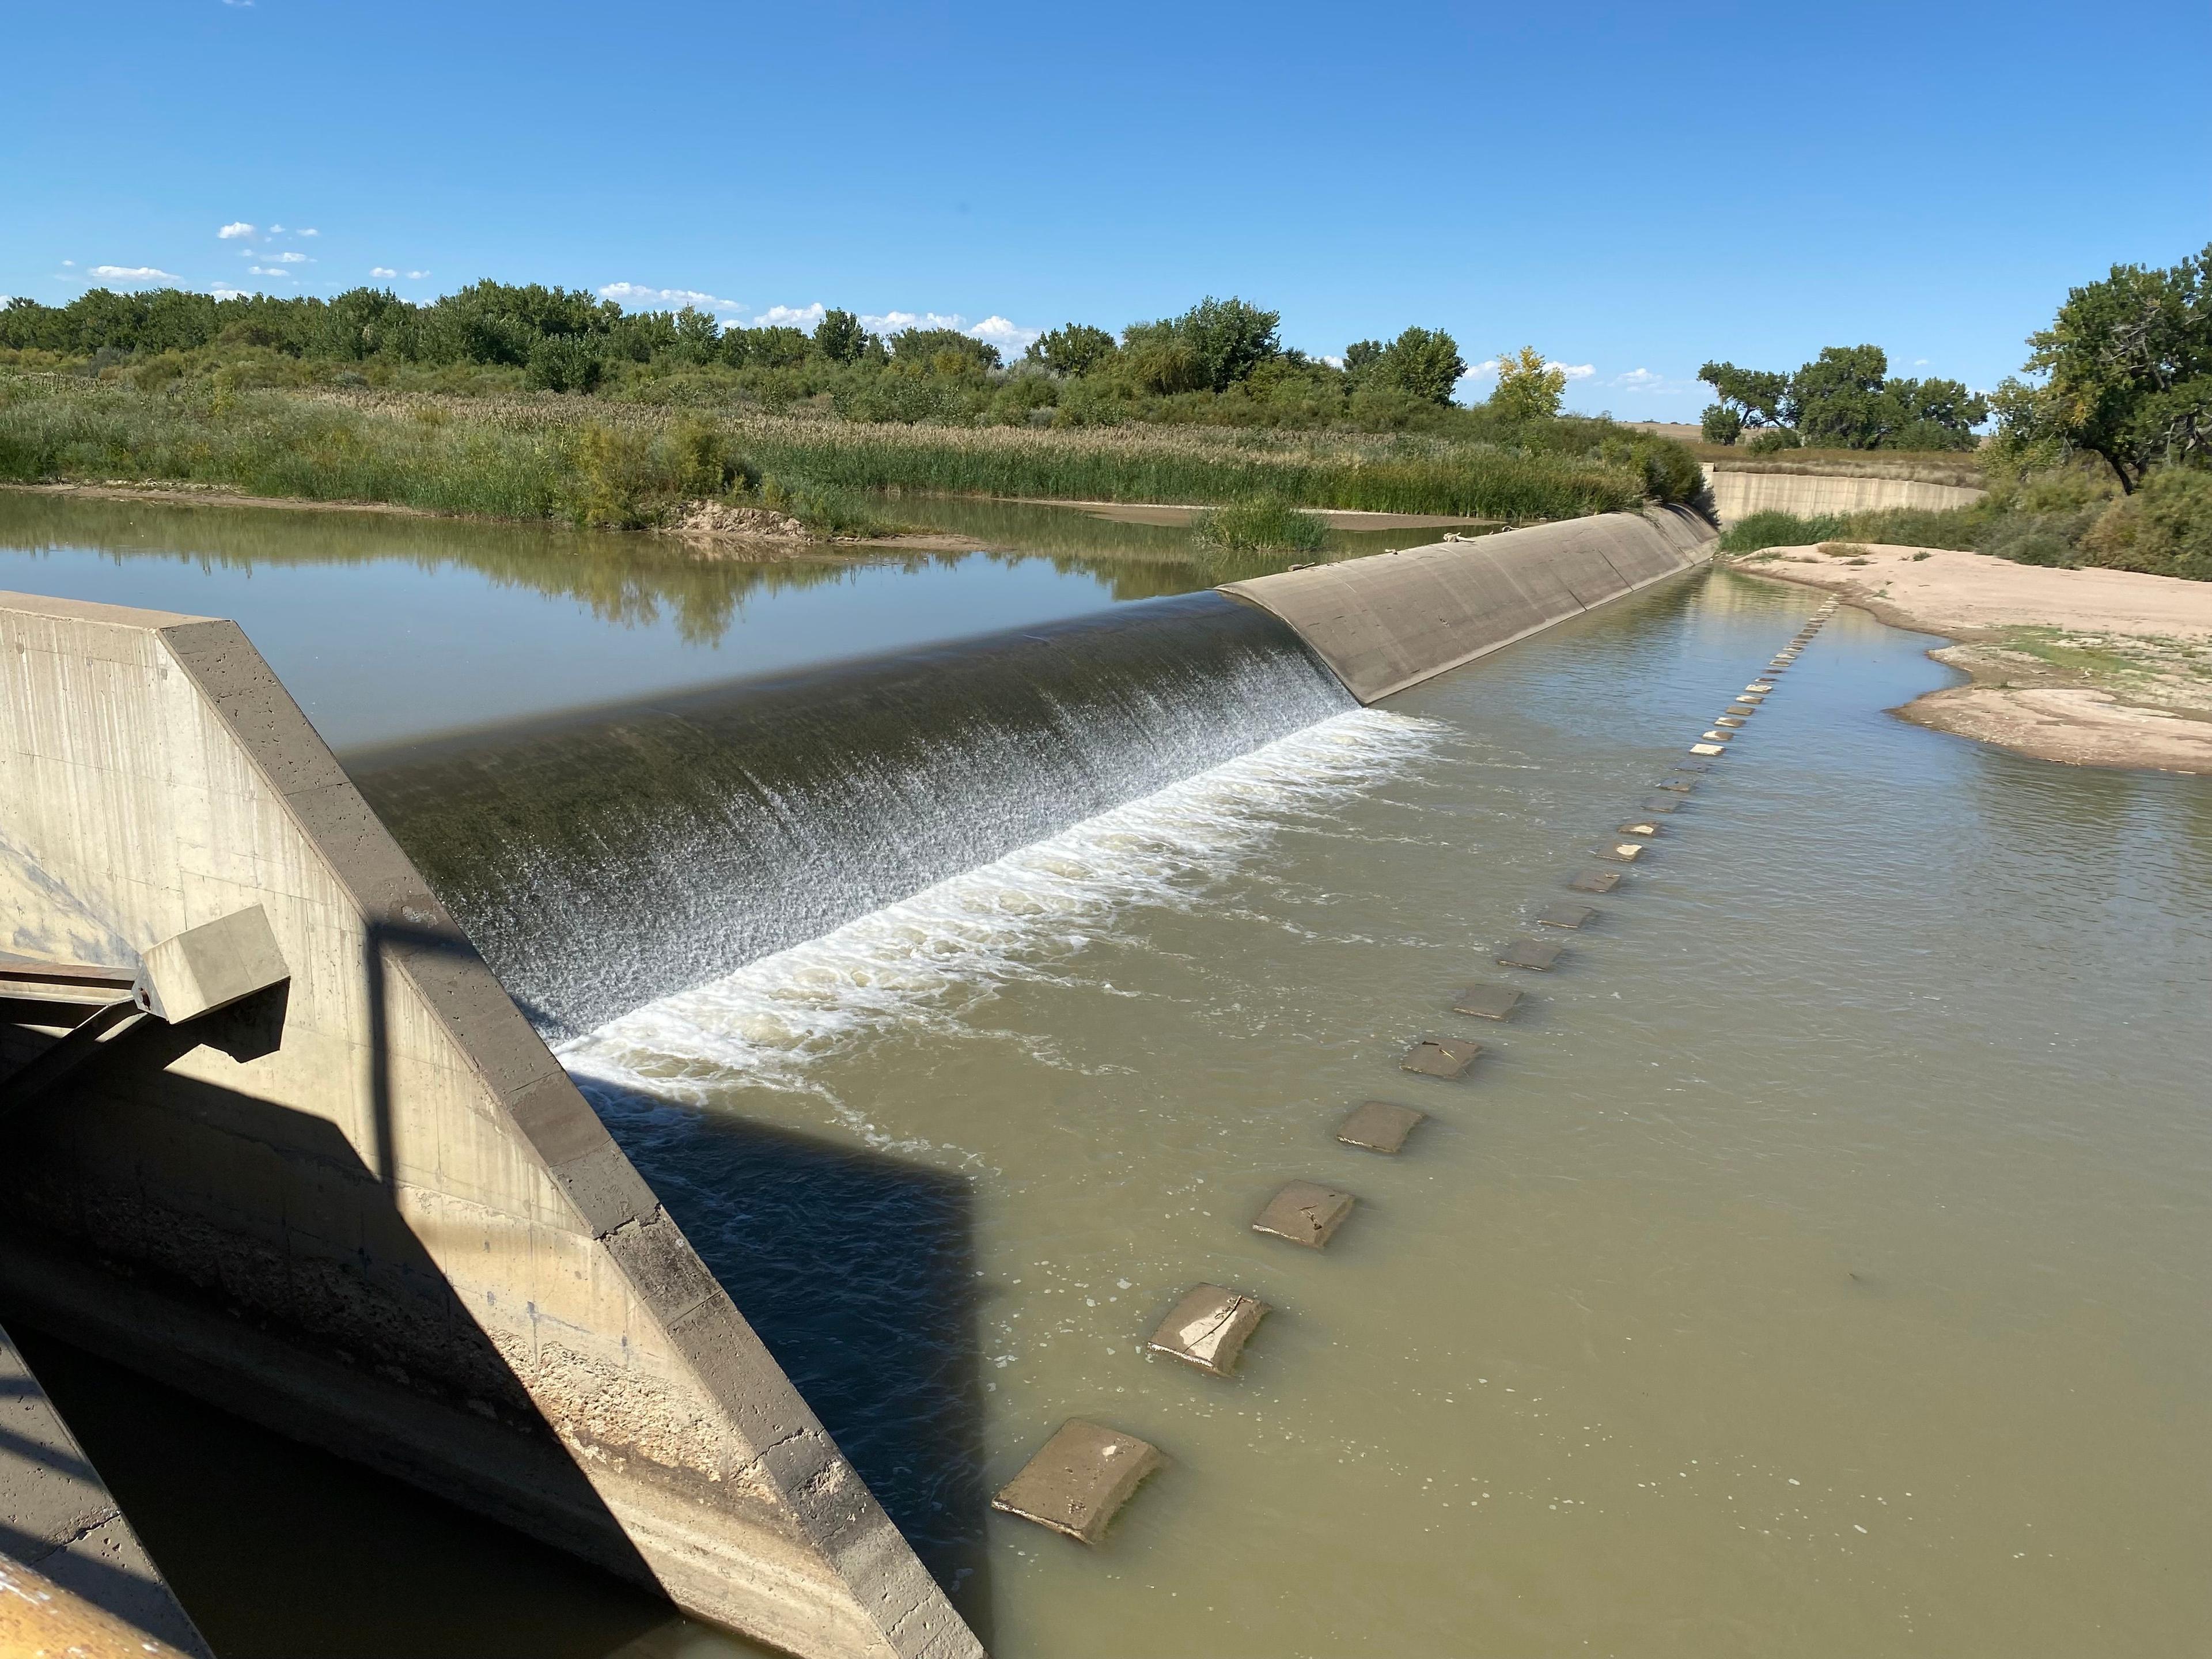 irrigation water flows over a small concrete dam with trees on the horizon and a cloudless blue sky above